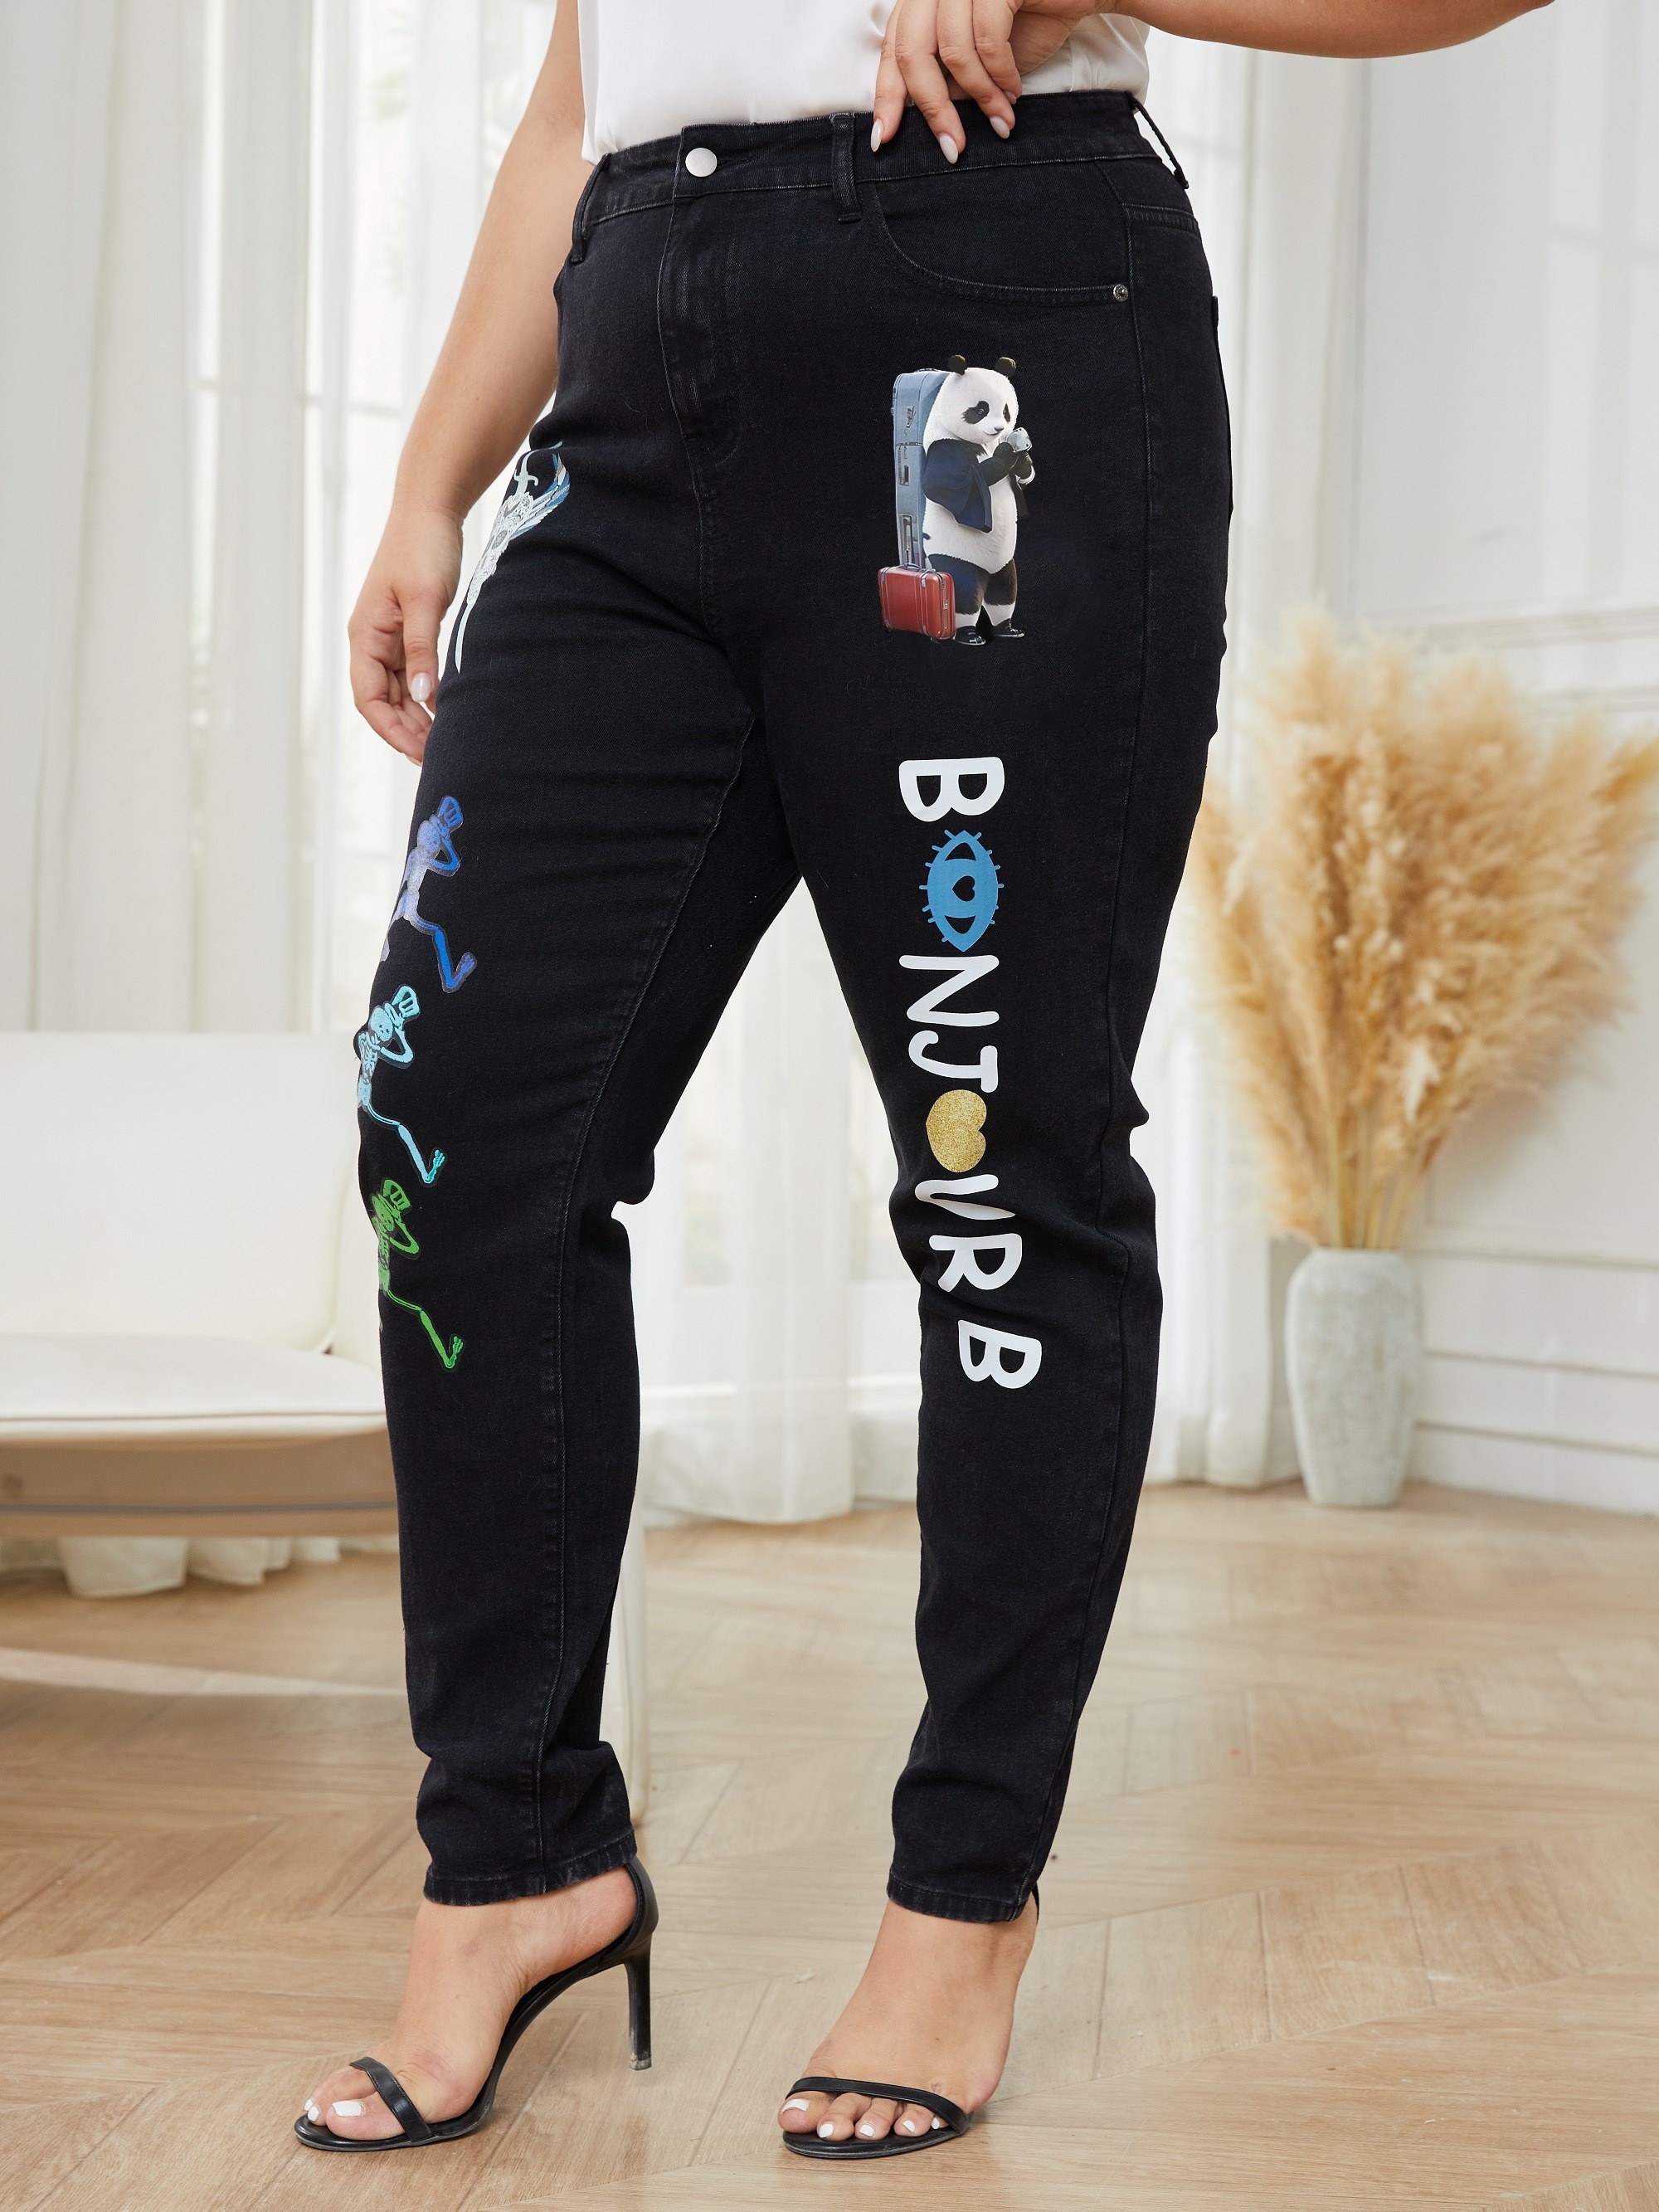 Plus Size NEW Ladies Stretchy Black Embroidery Skinny Jeans